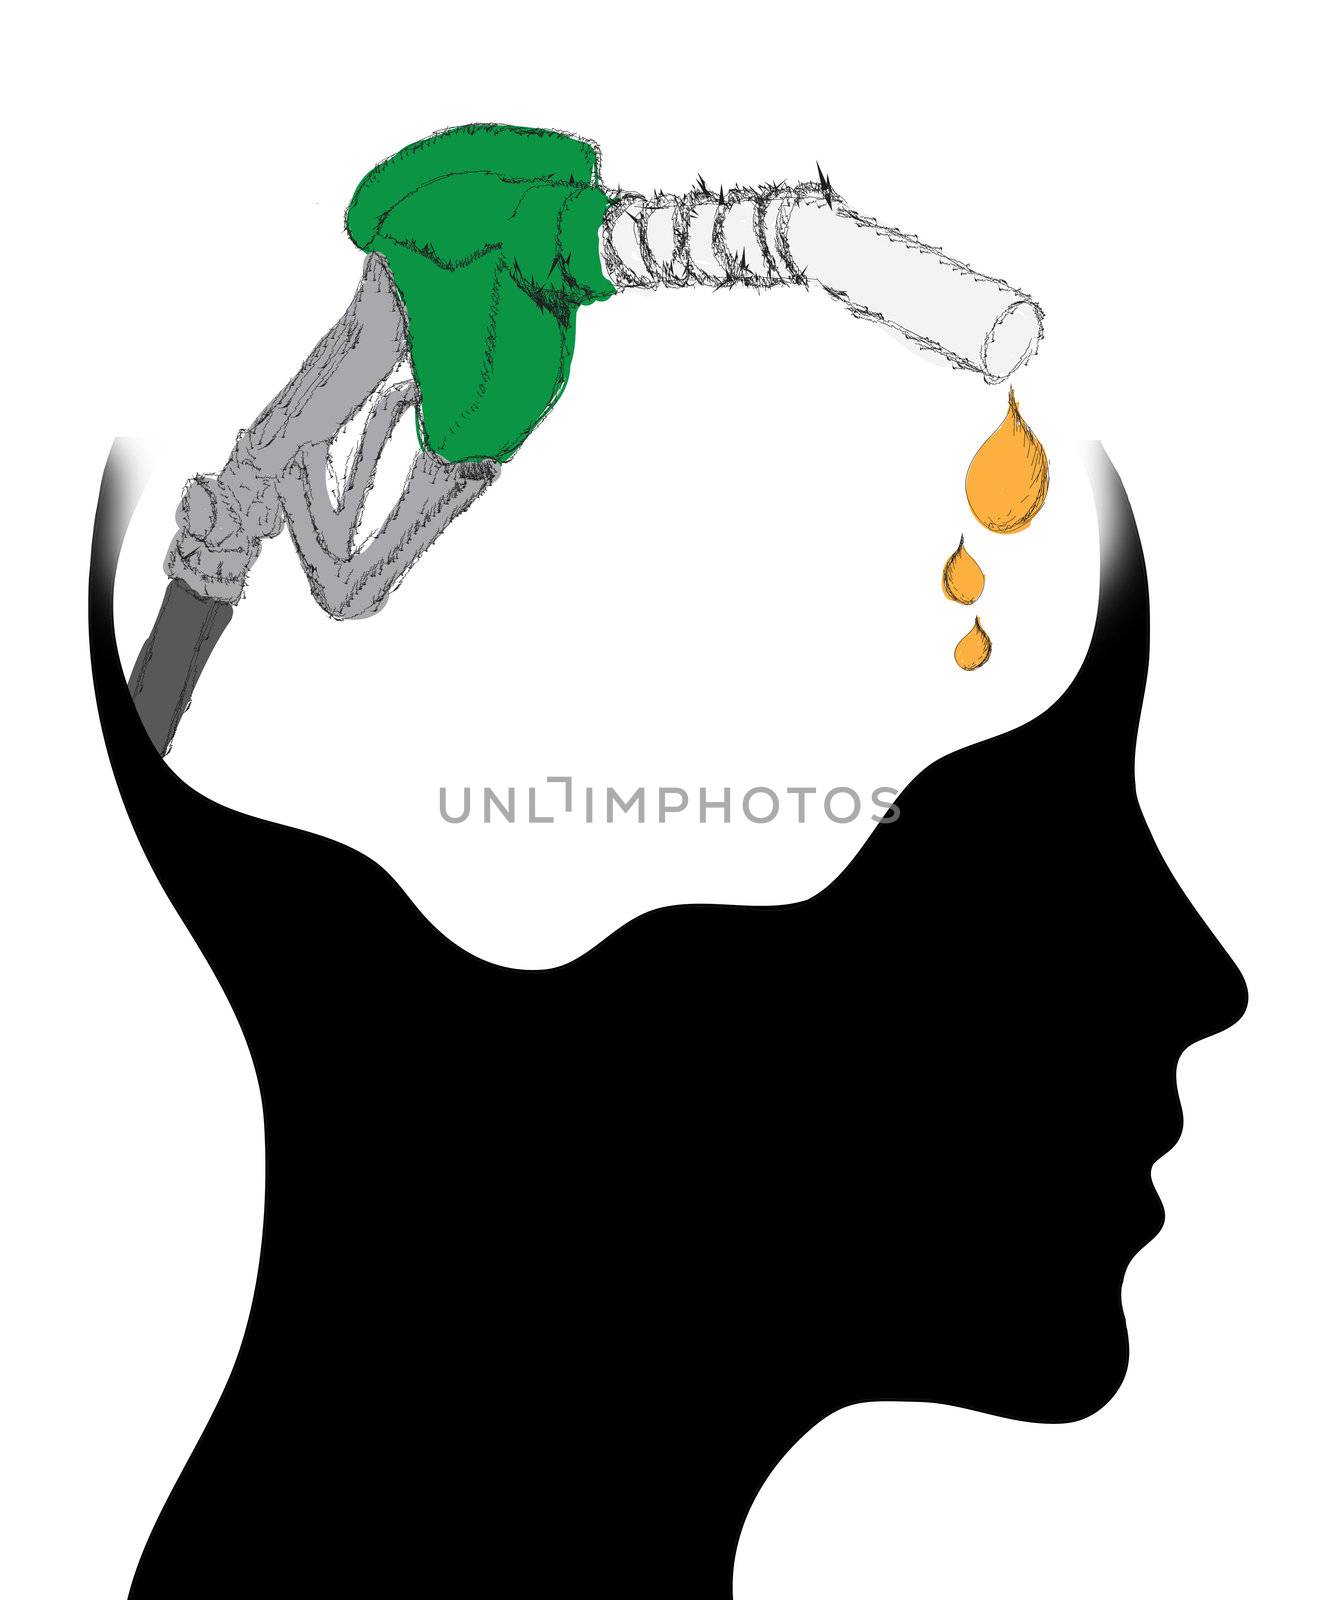 Thinking Head - A depiction of Idea, fuel pump by rufous